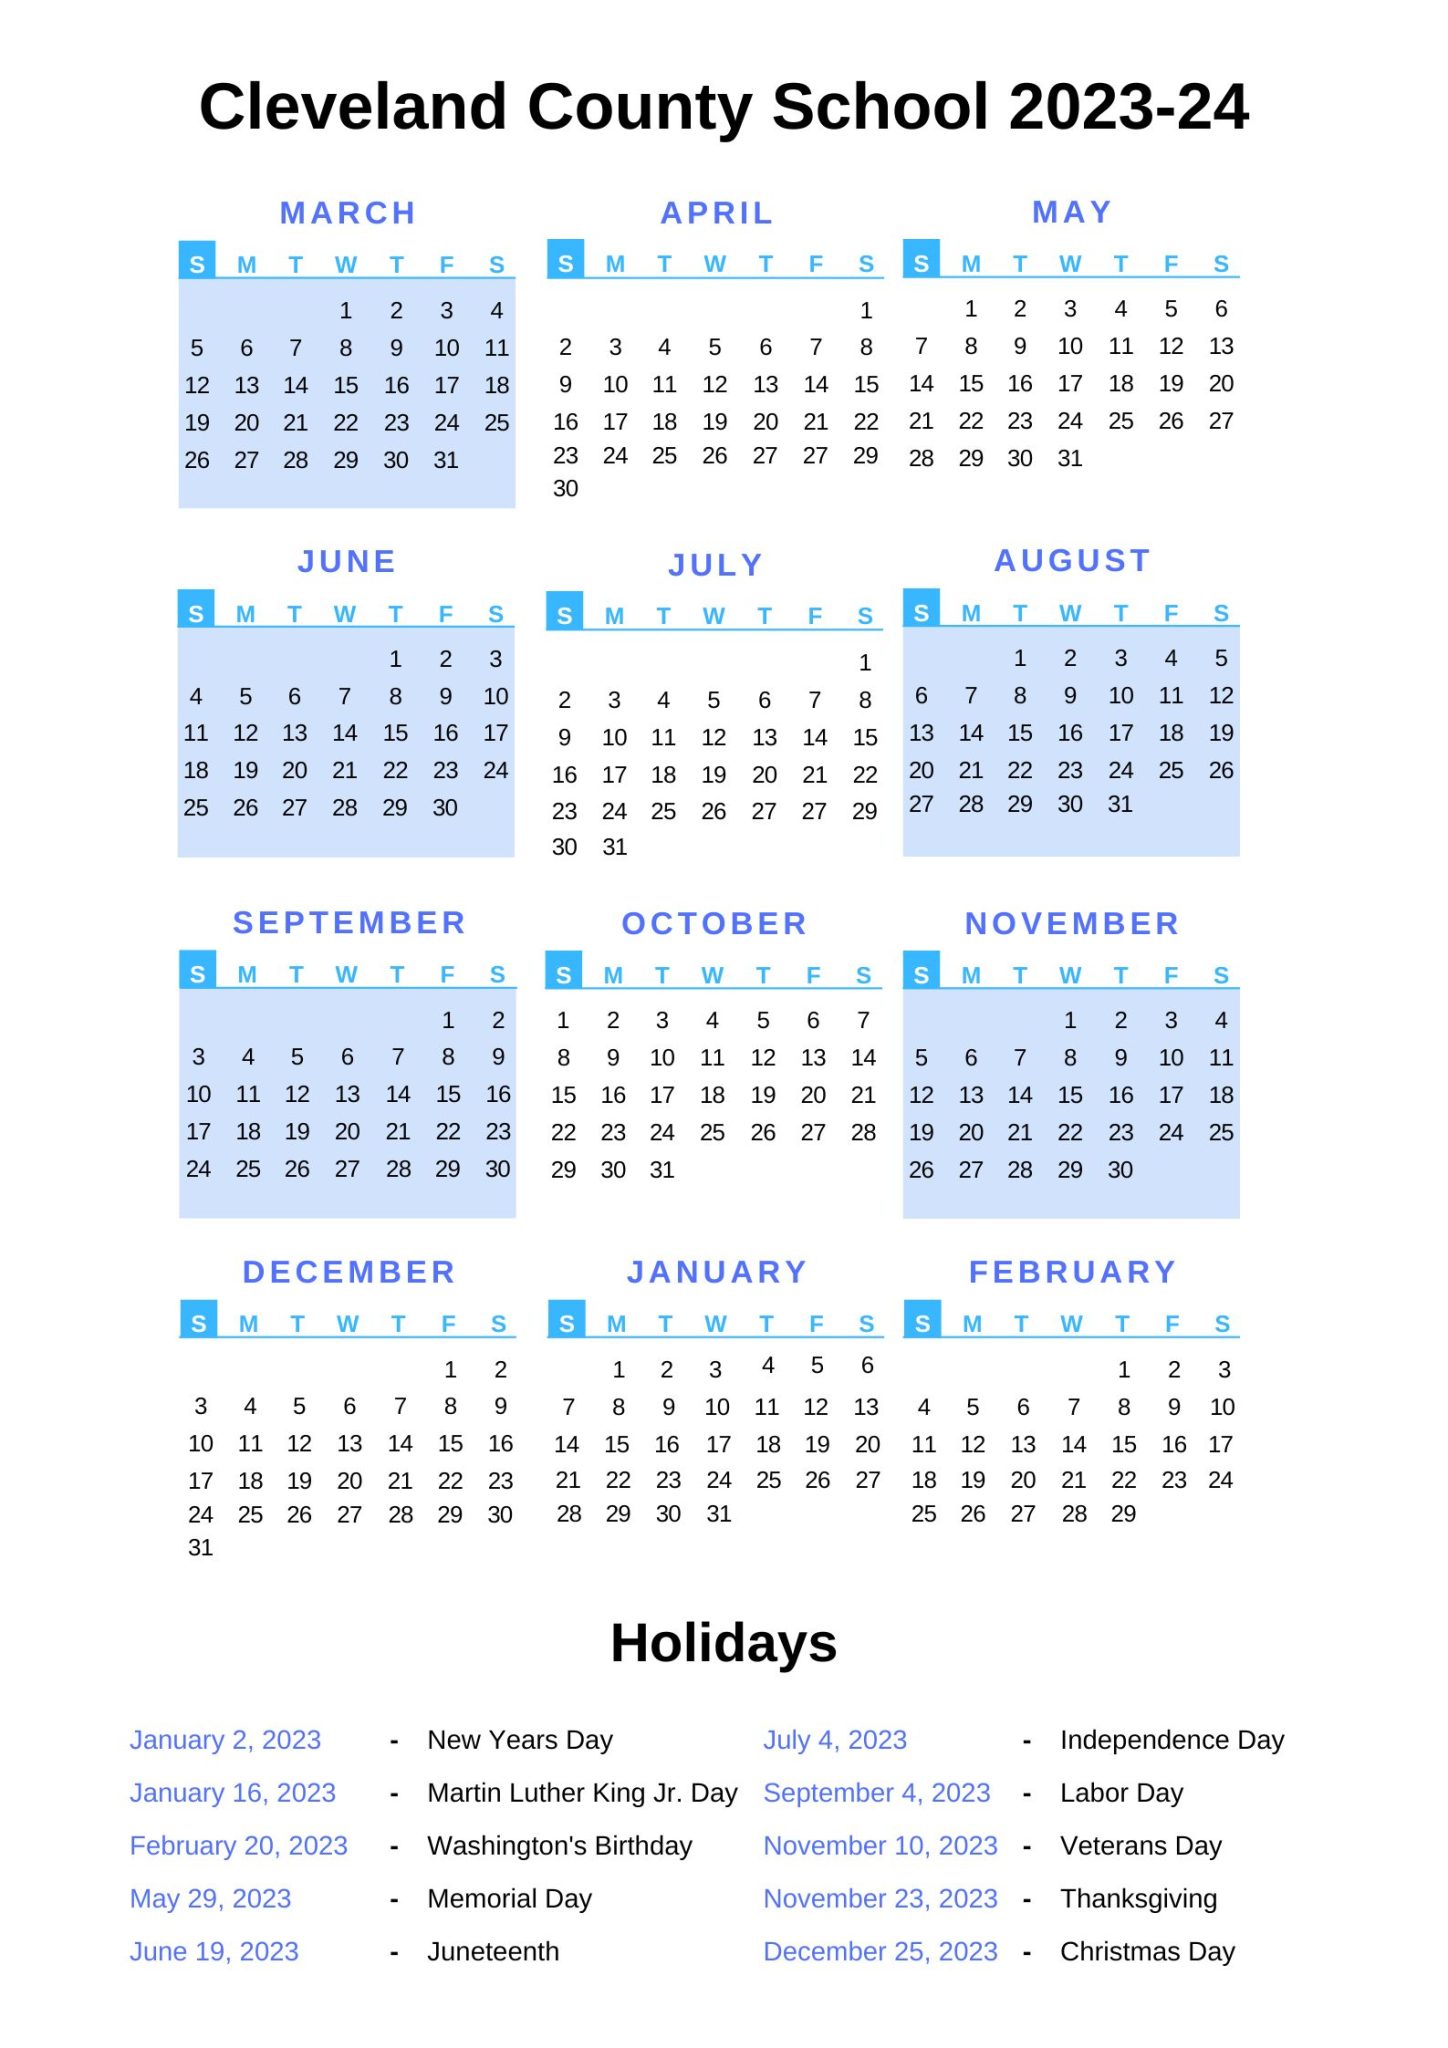 Cleveland County Schools Calendar 202324 With Holidays